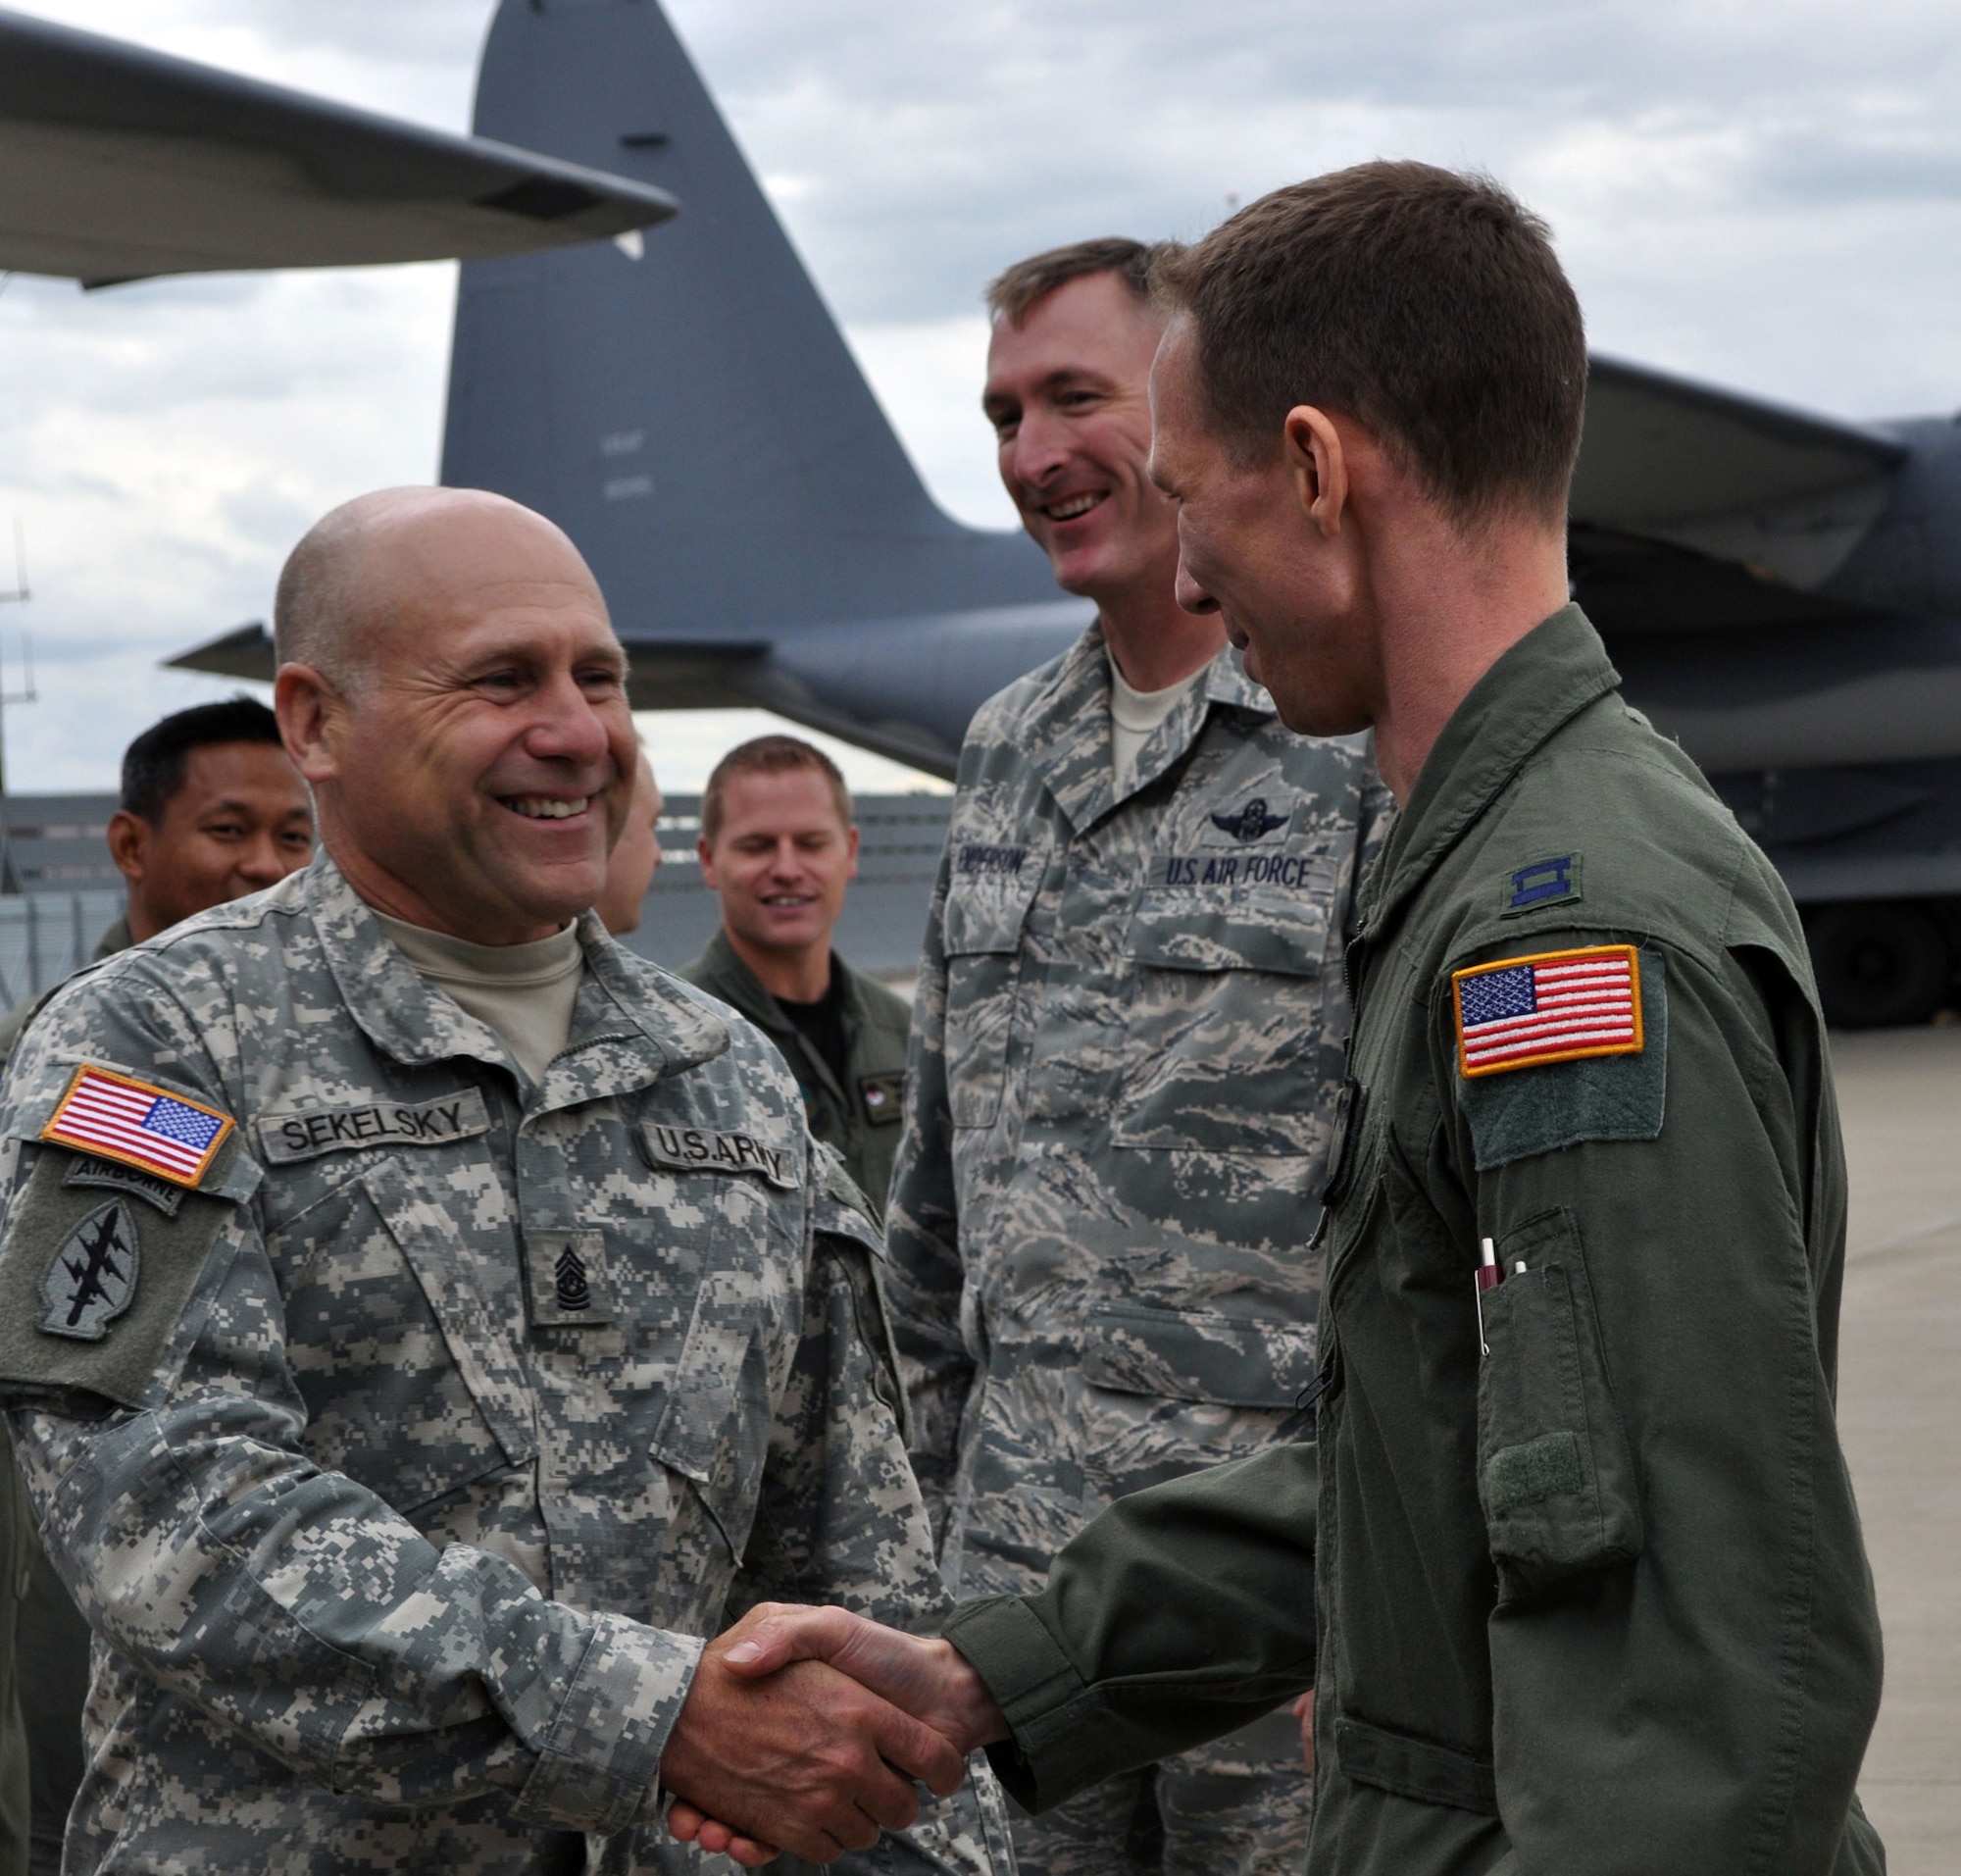 Command Sgt. Maj. Charles Sekelsky, Special Operations Command Europe senior enlisted advisor, is greeted by an MC-130H Combat Talon II crewmember during a visit to the 352nd Special Operations Group, Aug. 24.  SOCEUR is the command exercising operational control of the 352nd SOG, the only Air Force special operations unitin United States European Command.  (U.S. Air Force photo/Tech. Sgt. Marelise Wood)